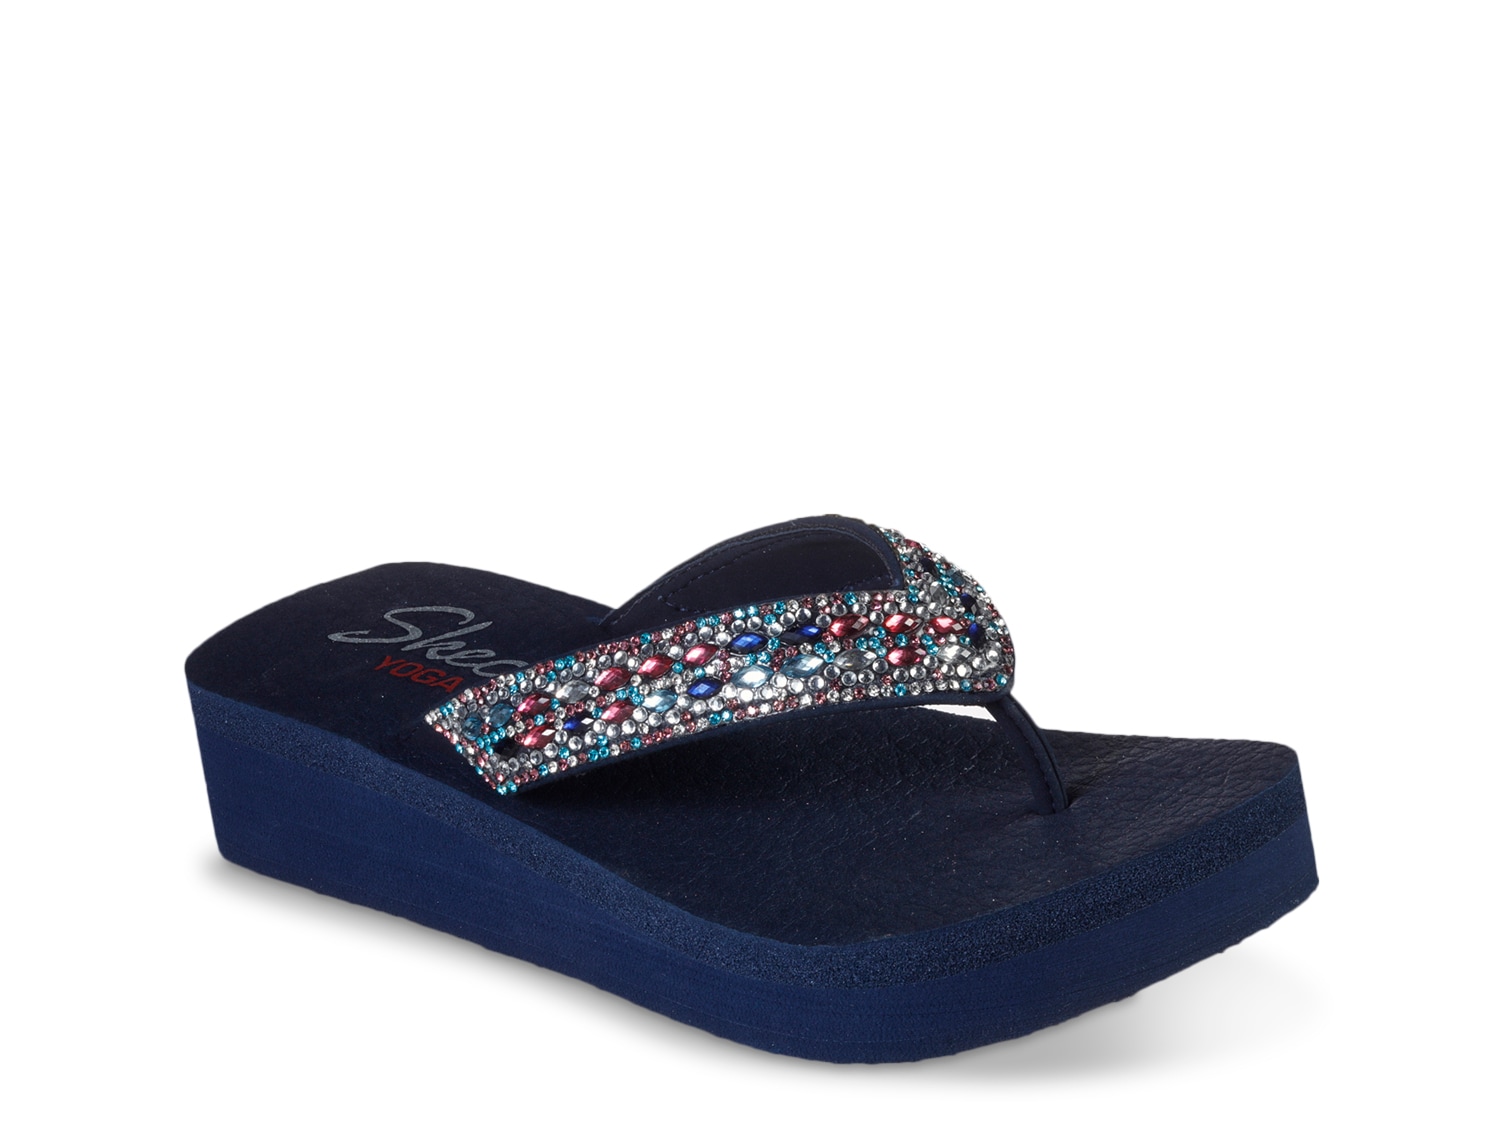 skechers sandals with bling